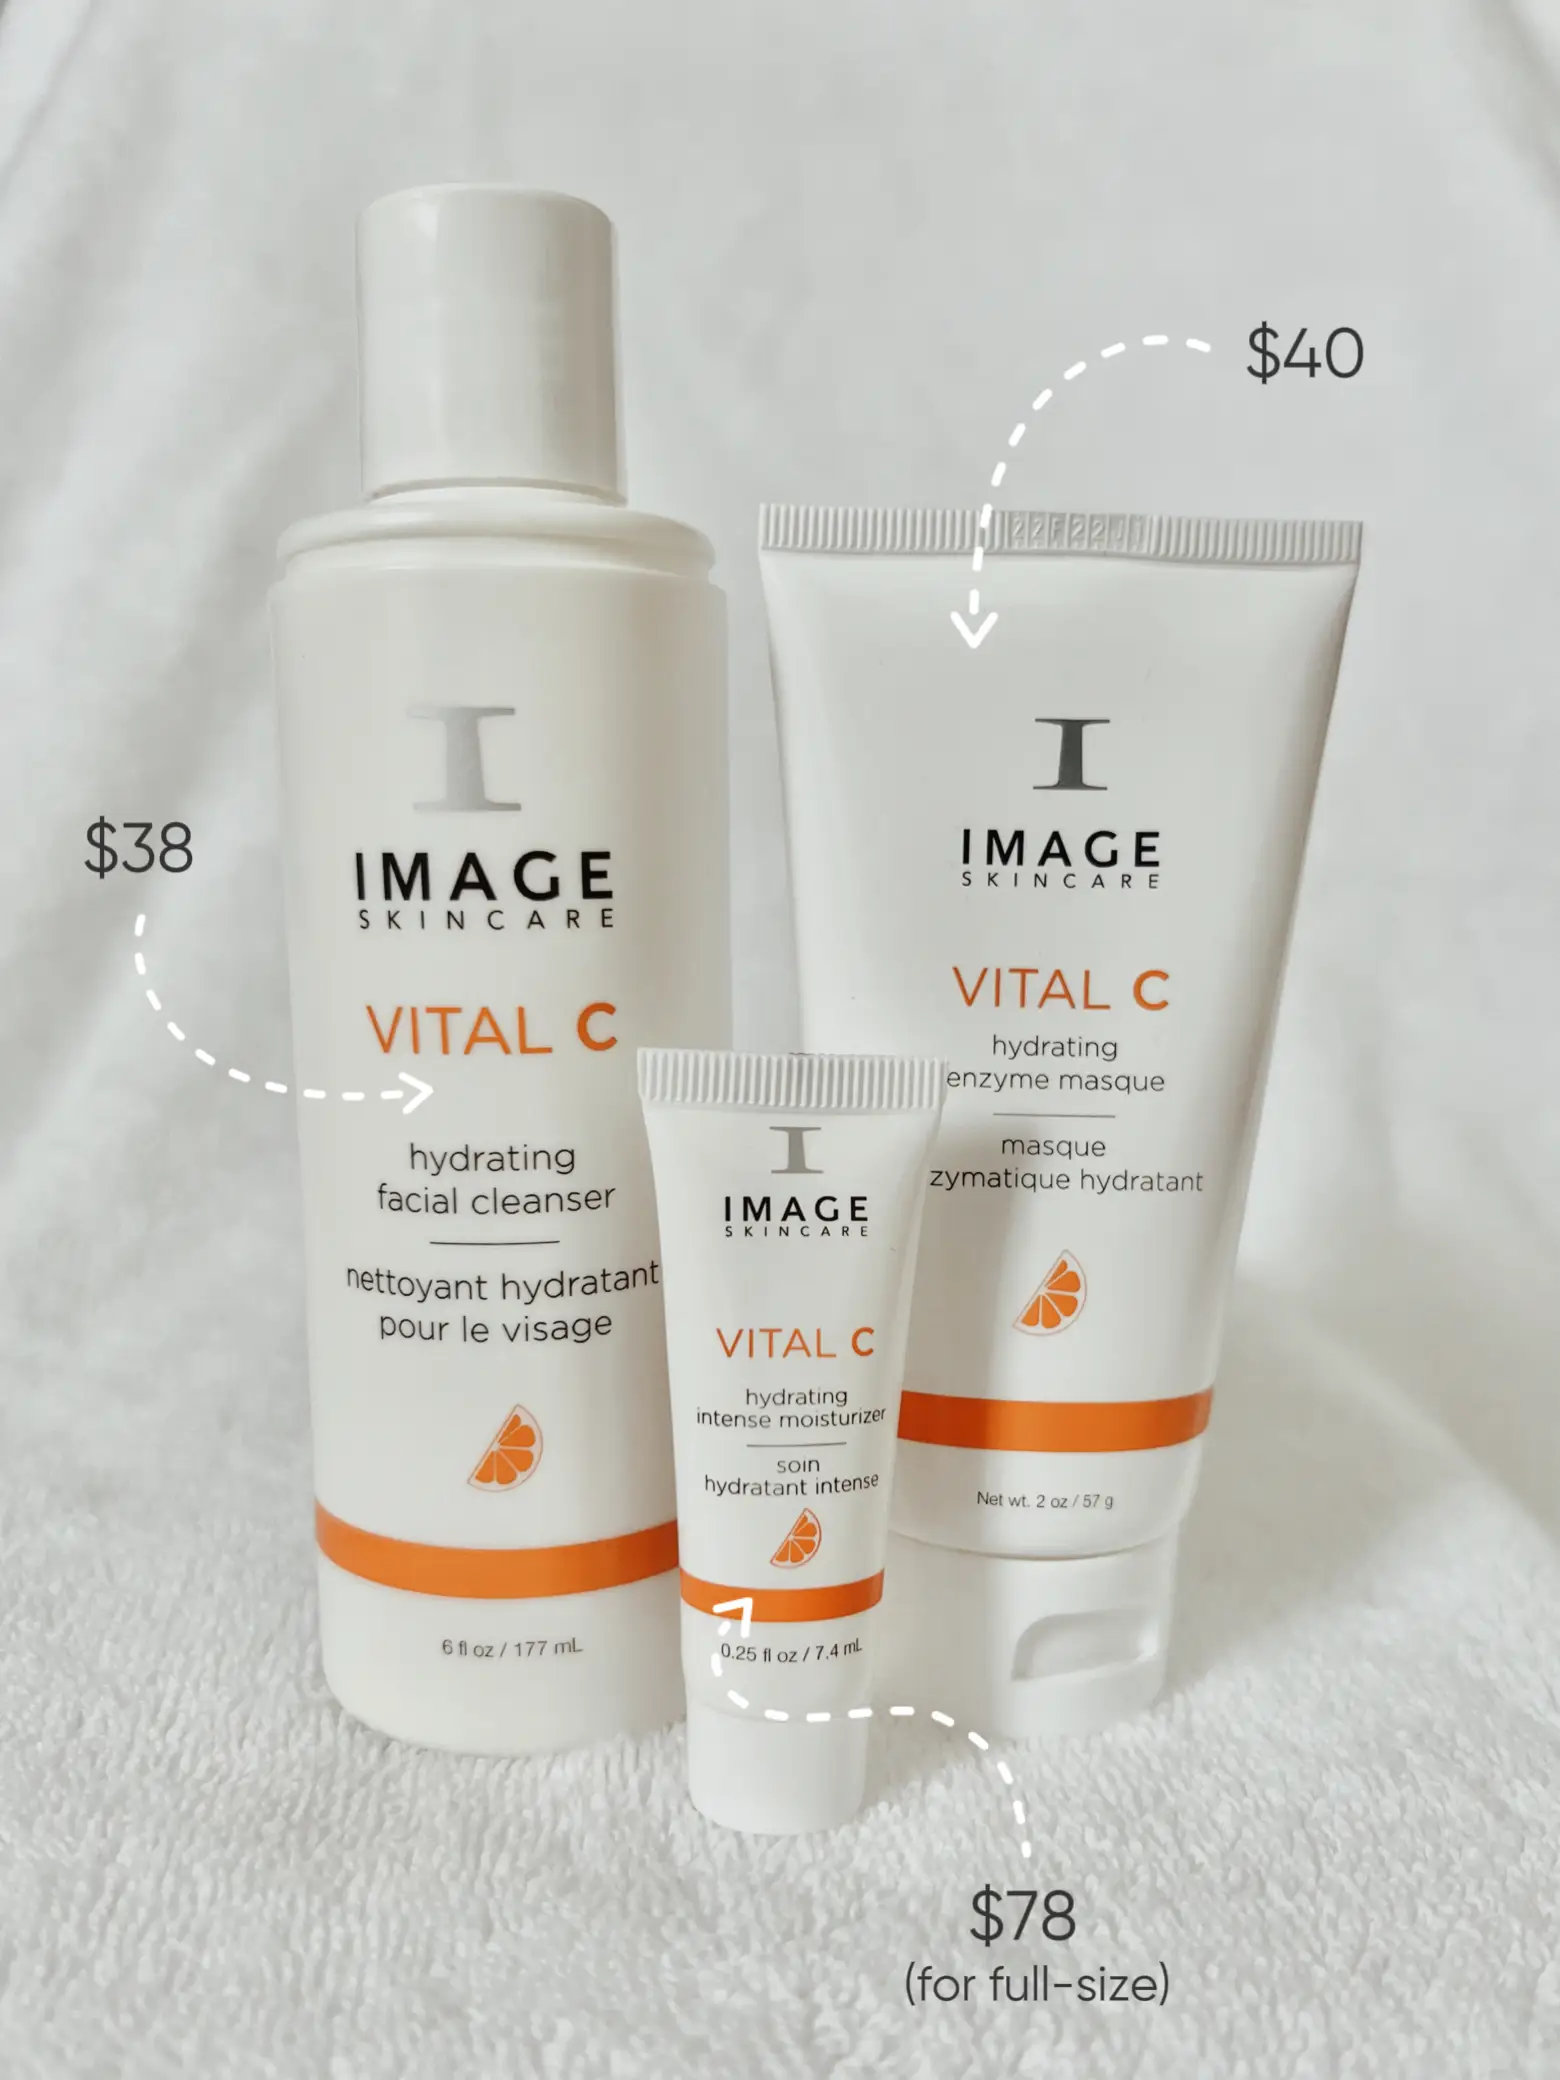 Image Skincare Vital C Review, Gallery posted by mollybear